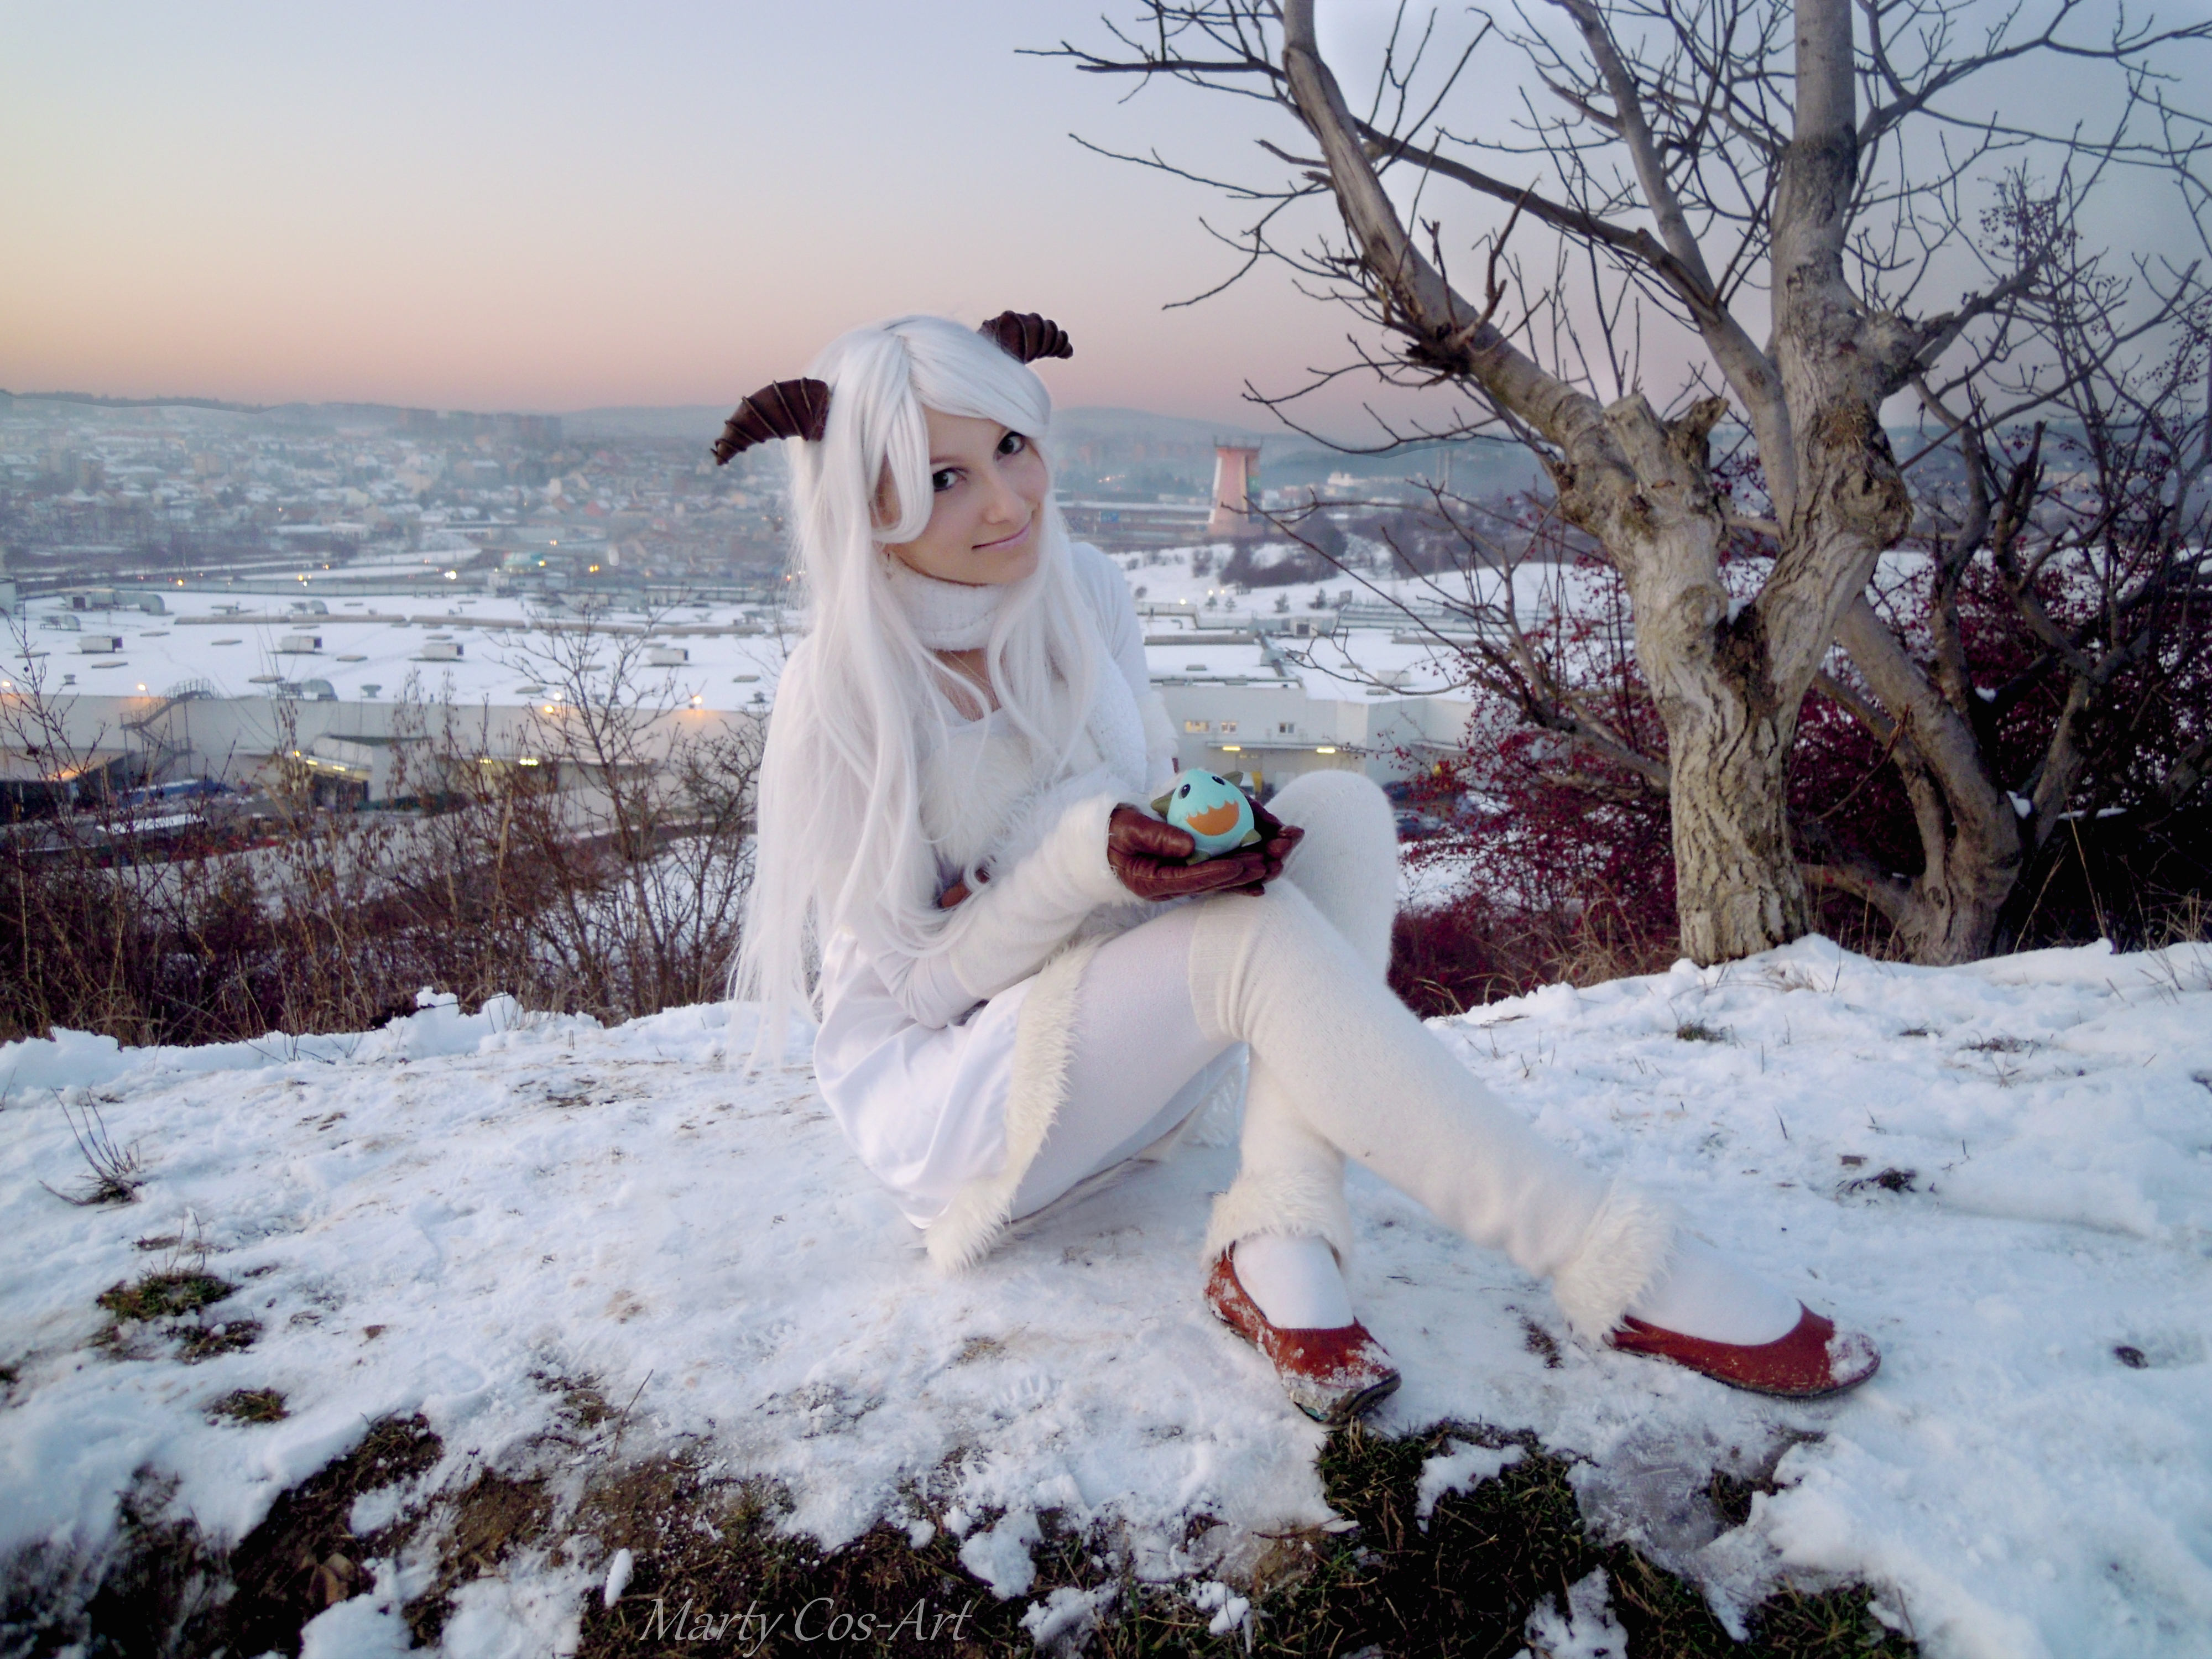 Poro (League of Legends) cosplay